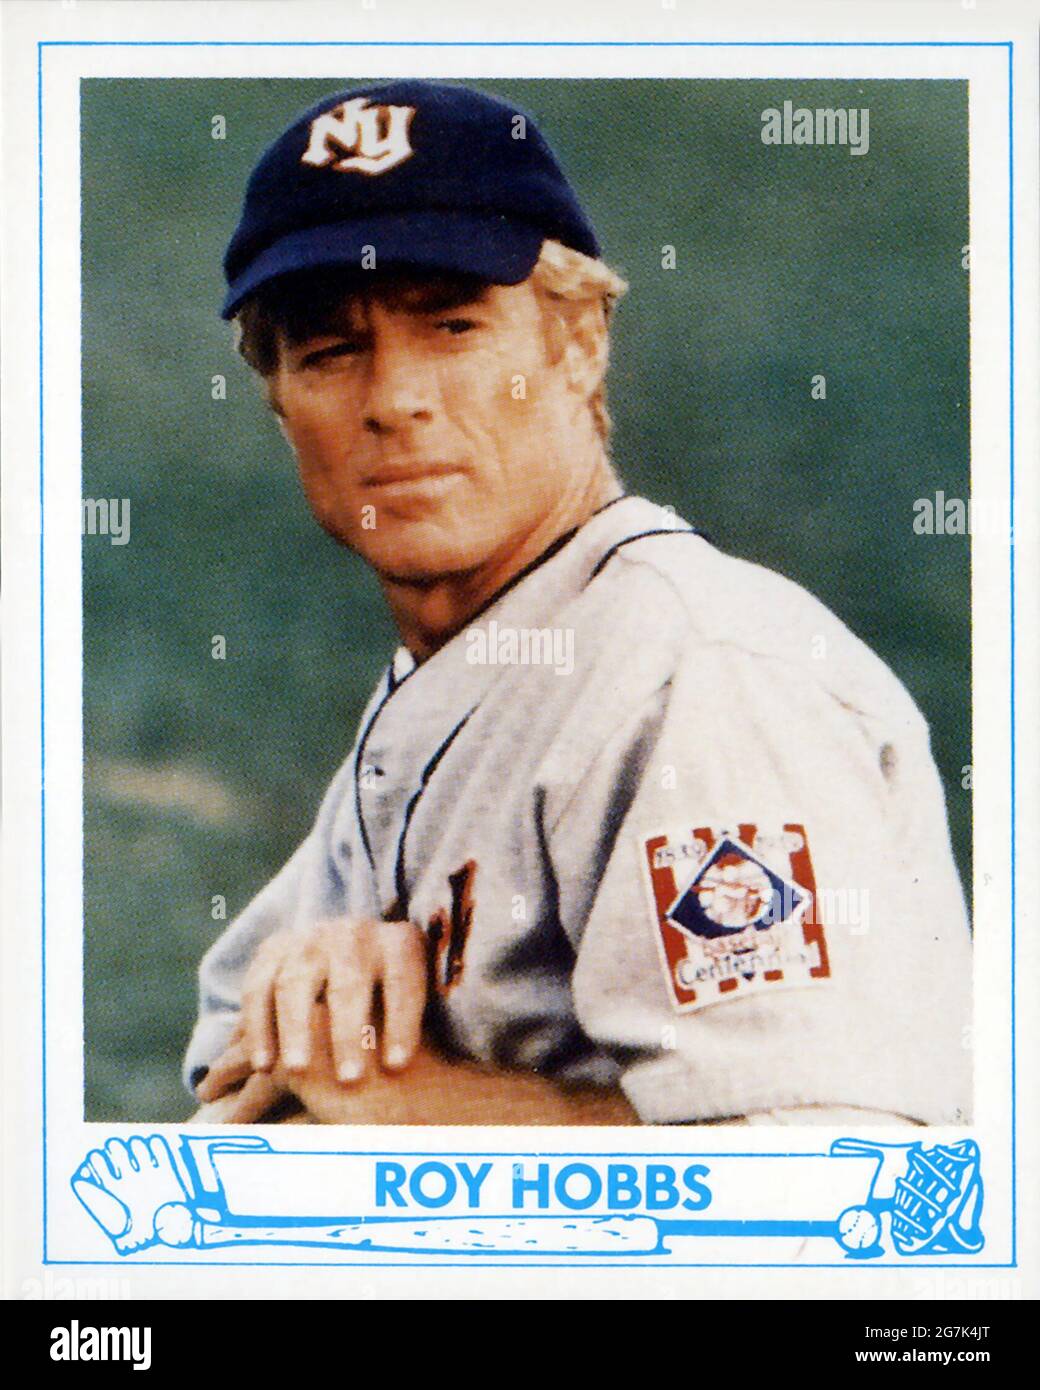 Promotional baseball card featuring actor Robert Redford in his roll as Roy  Hobbs from the movie The Natural which was released in 1984 by Sony  Pictures Stock Photo - Alamy